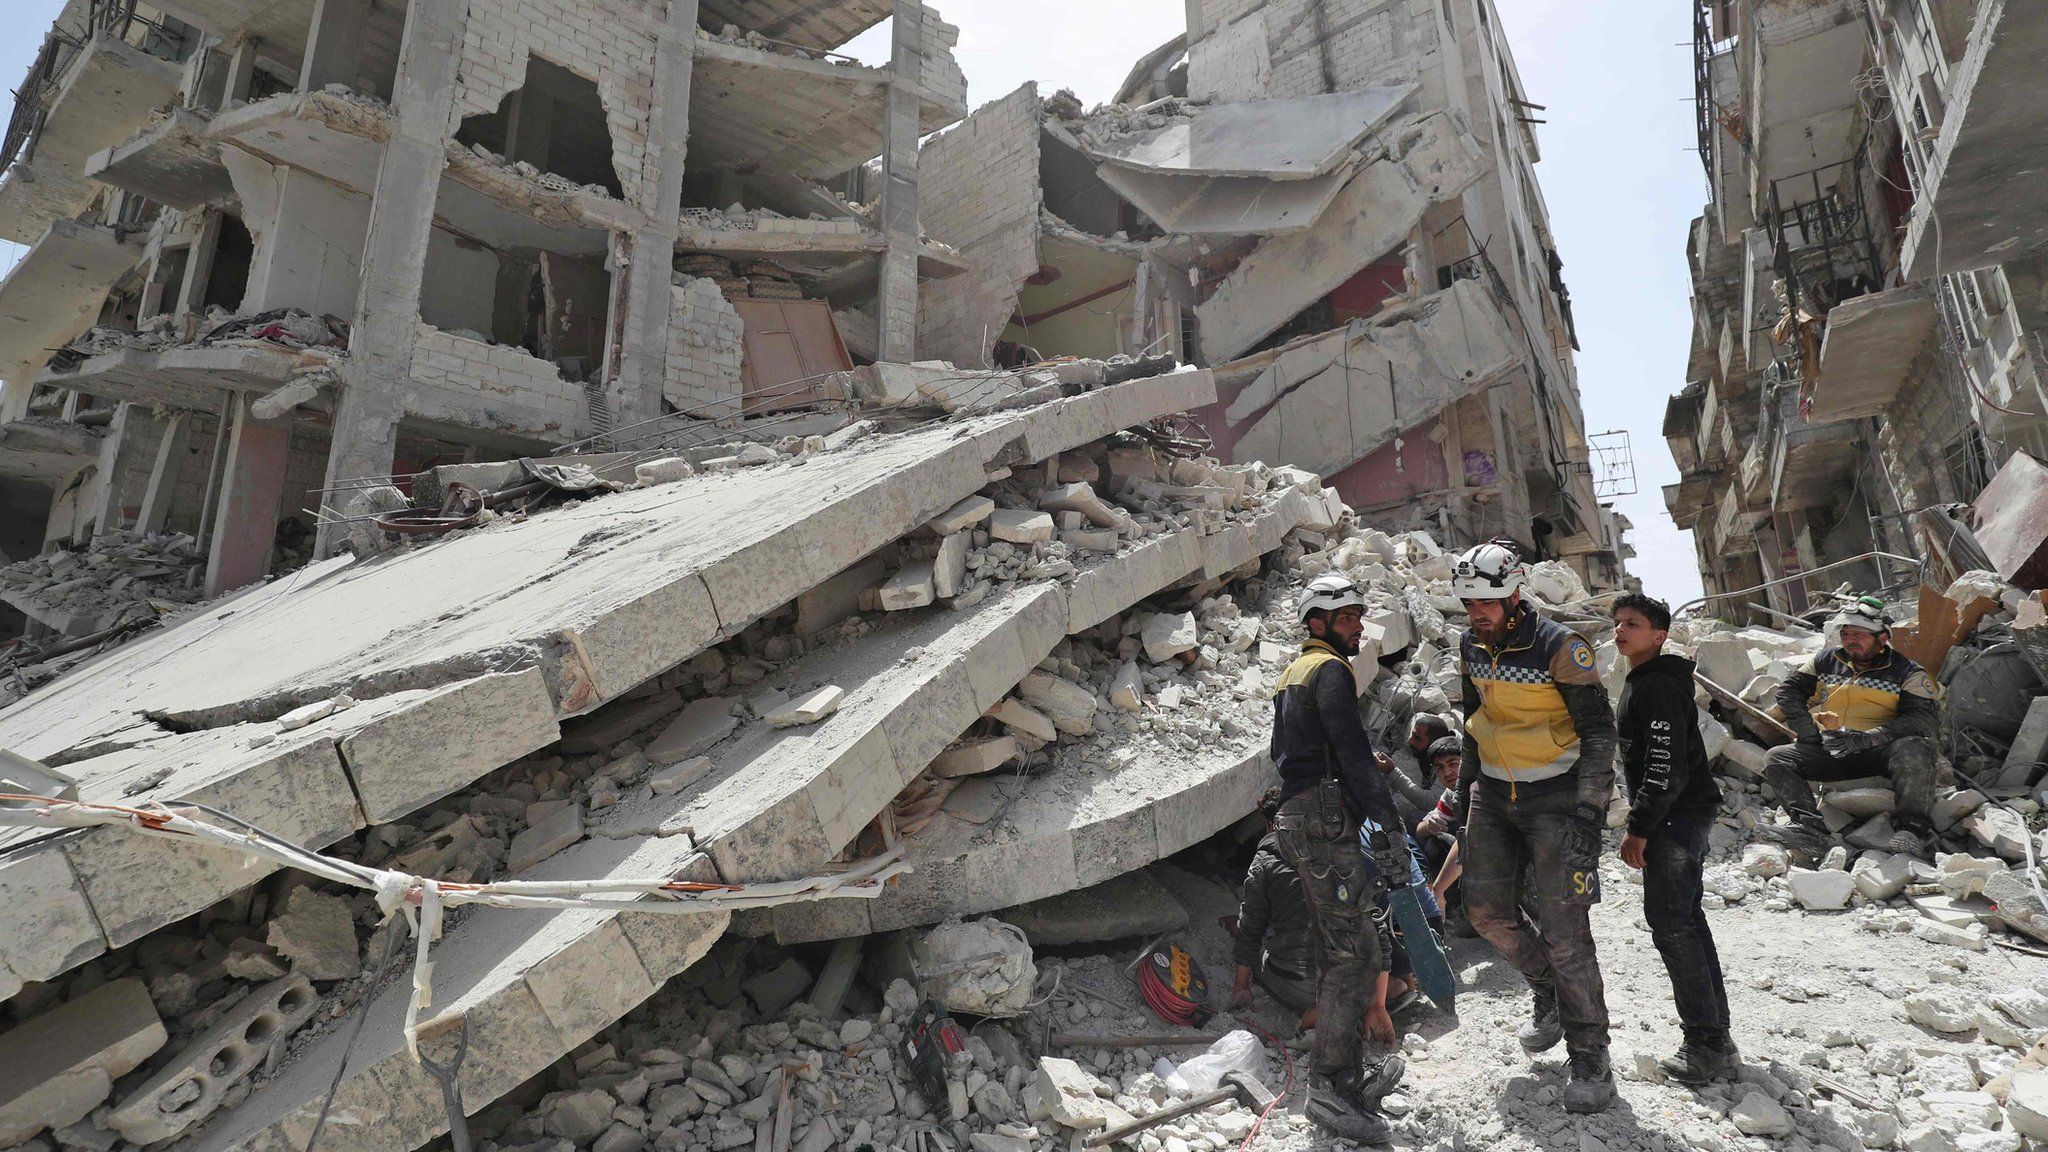 Rescue workers from the Syria Civil Defence, also known as the White Helmets, search the rubble of a collapsed building following an explosion in the opposition-held town of Jisr al-Shughour (24 April 2019)